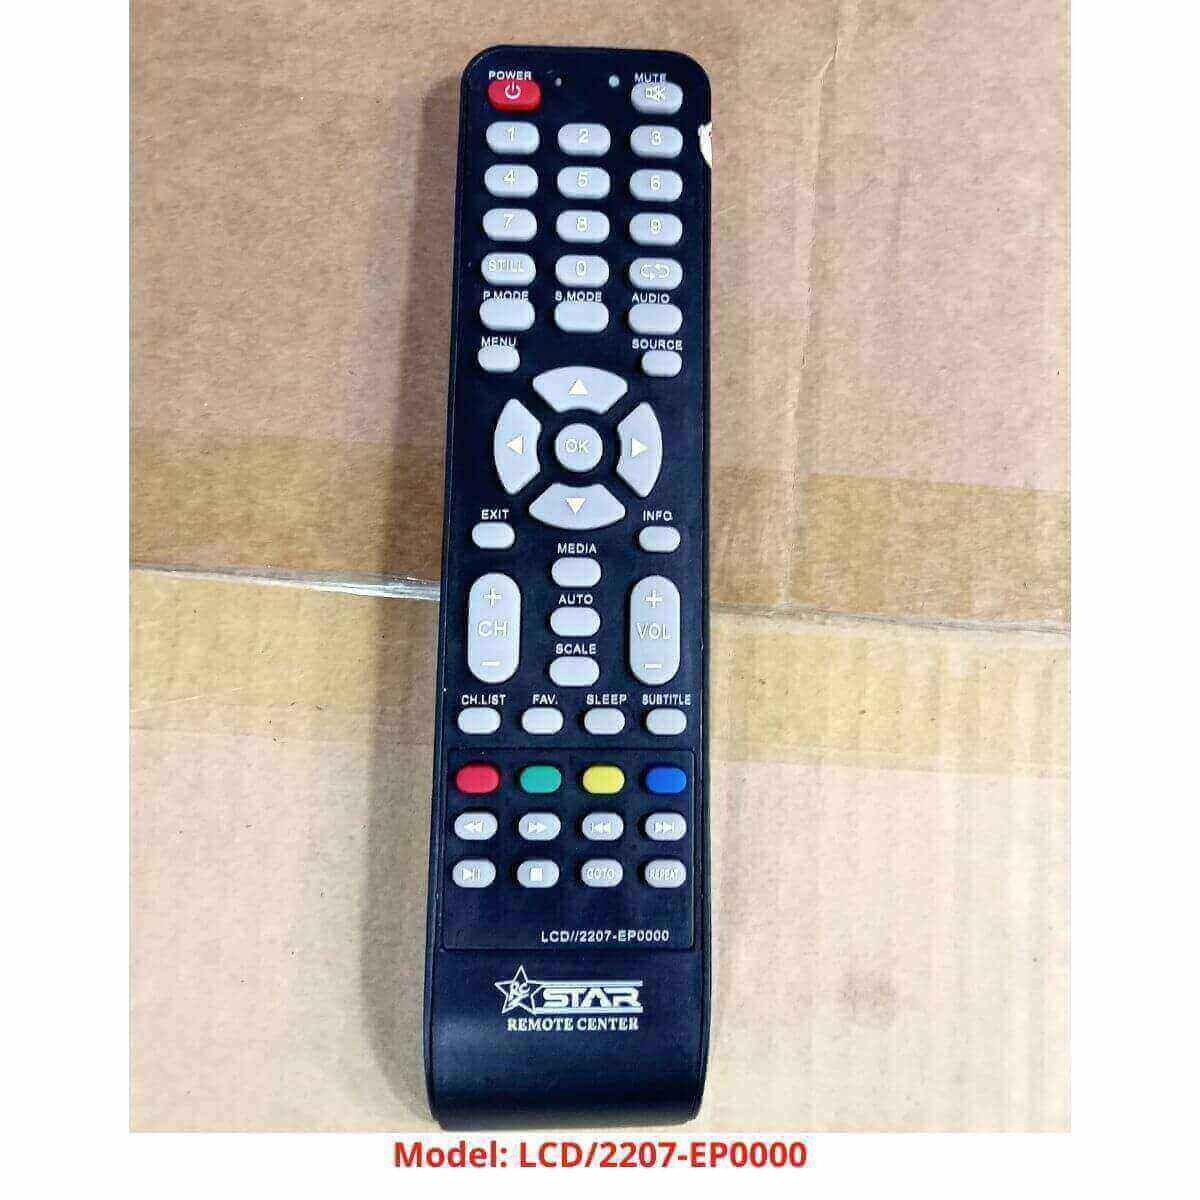 COMMON LCD LED TV REMOTE STAR 2207-EP0000 BD